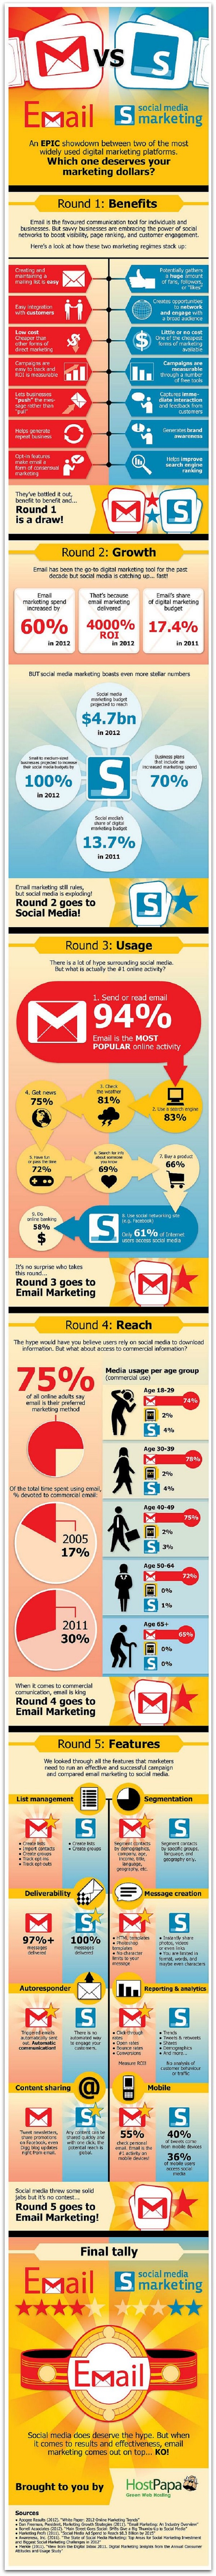 Email_Marketing_Infographic